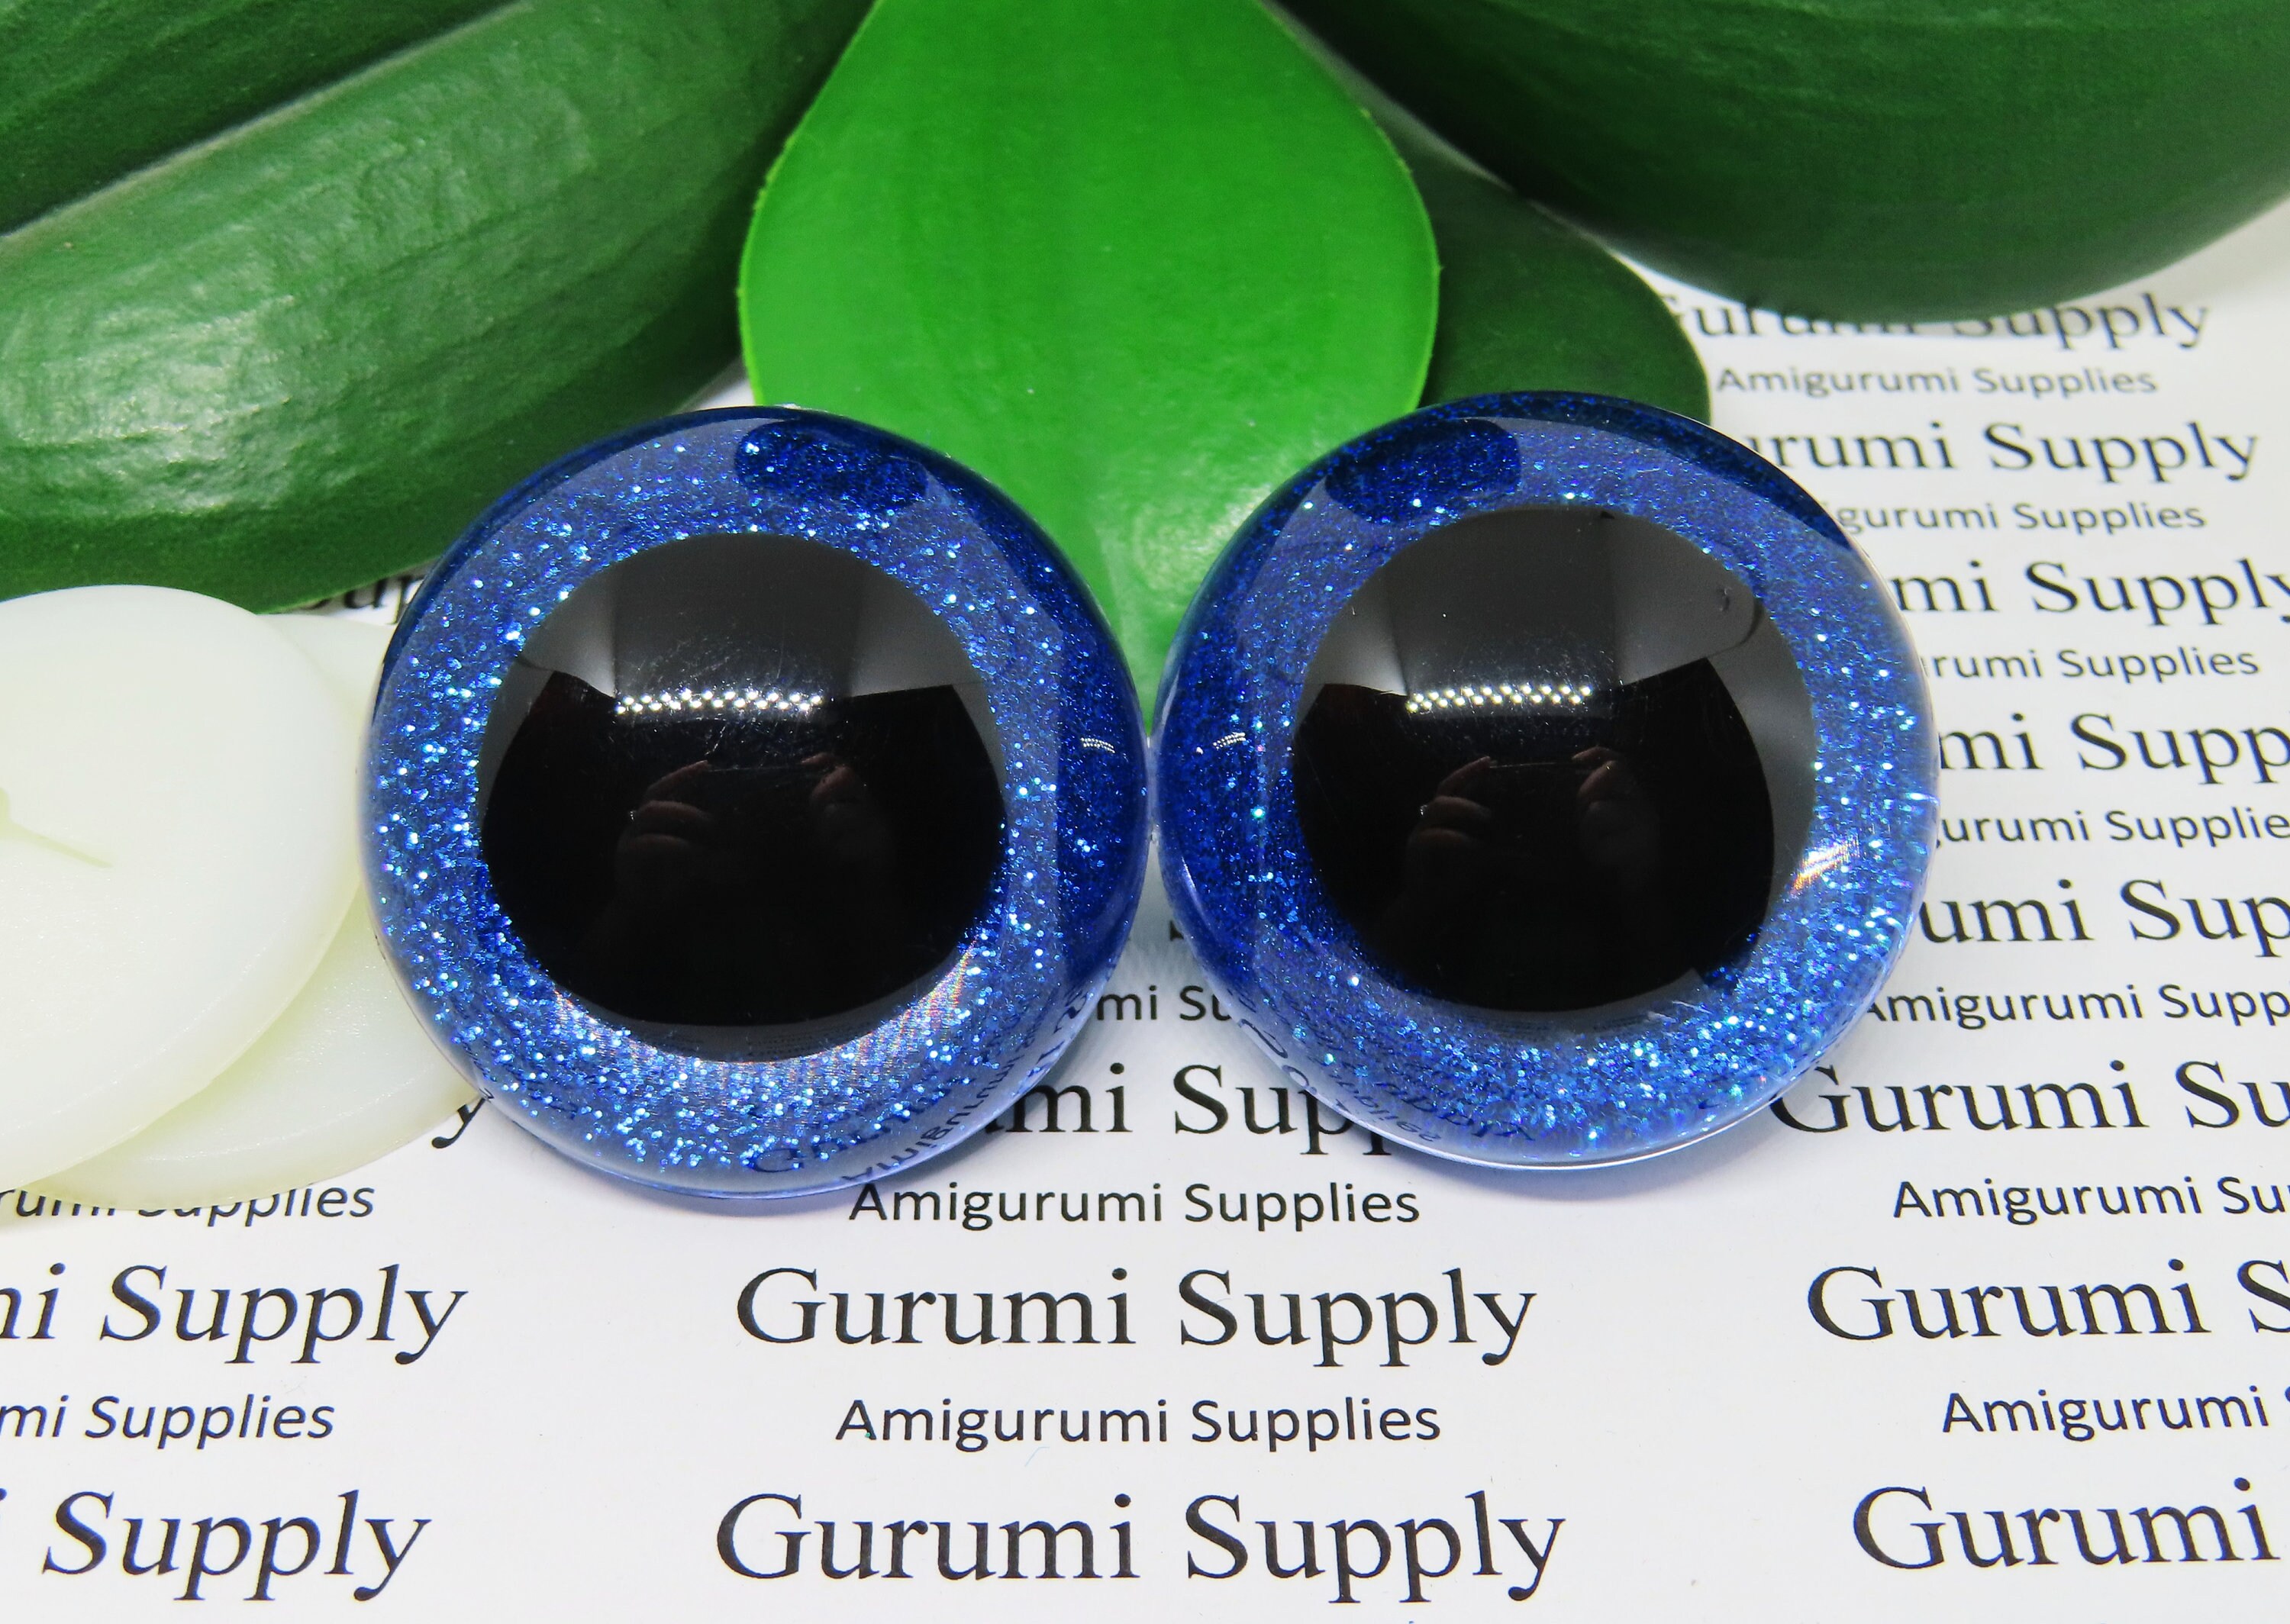 Plastic Safety Eyes - 30mm Blue - 4 Pairs